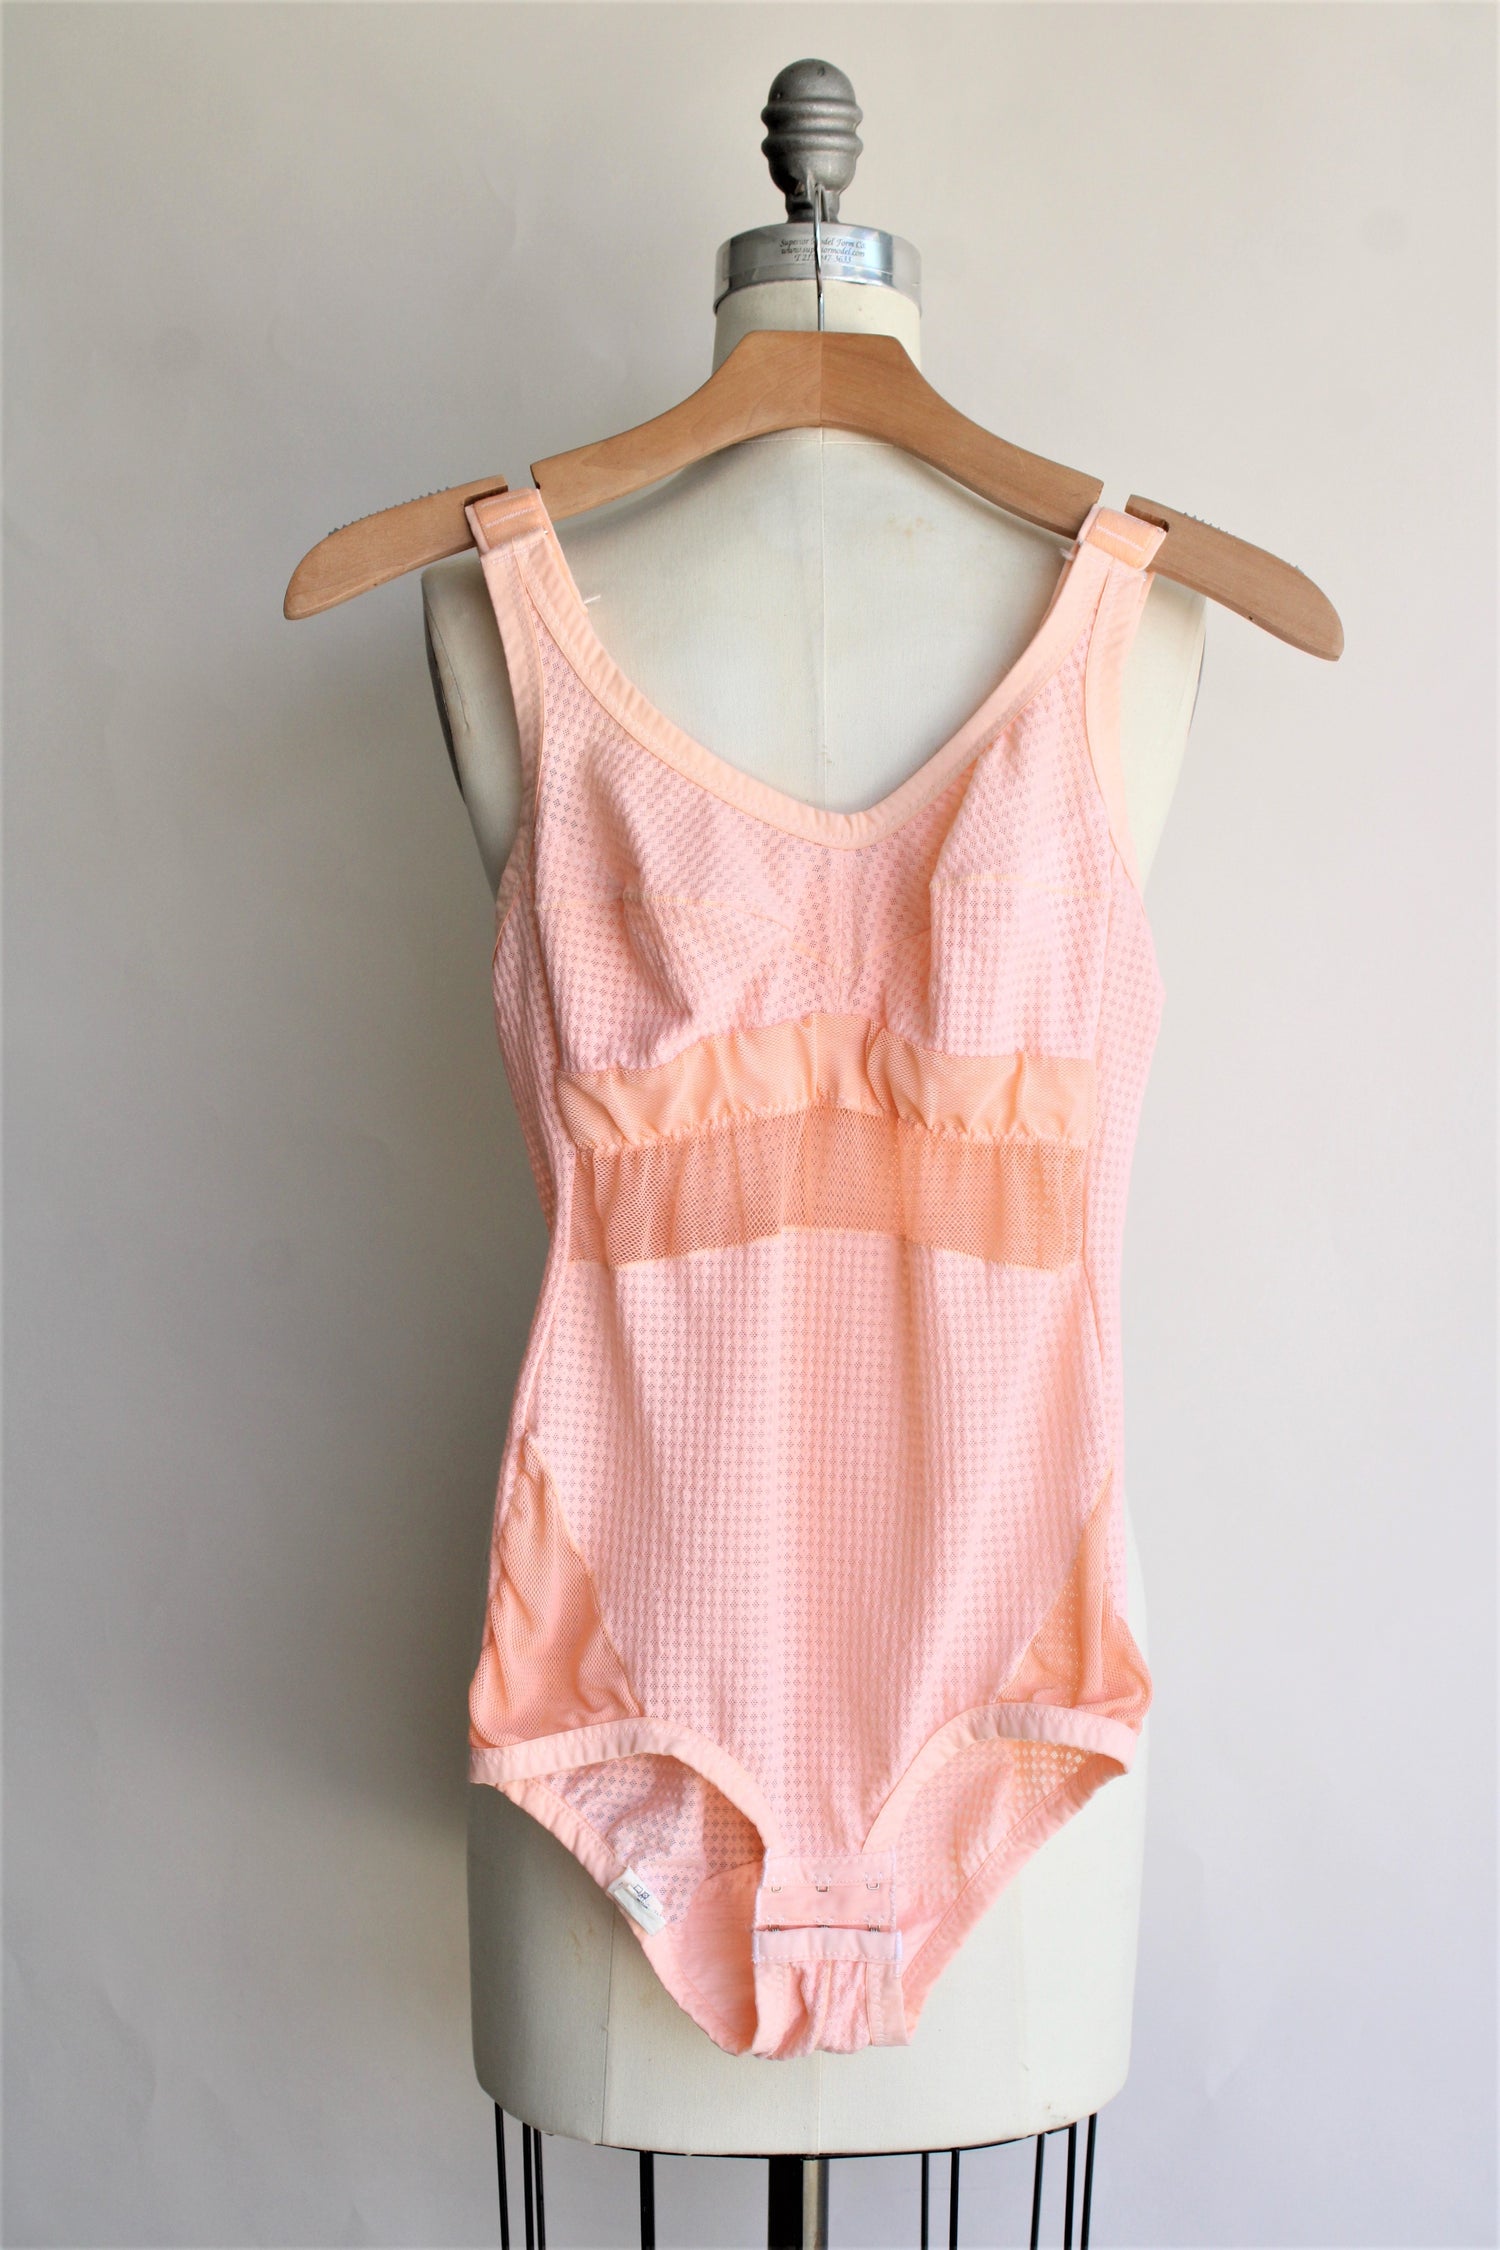 Vintage 1970s 1980s Peach Body Suit Shapewear by Miss Mary of